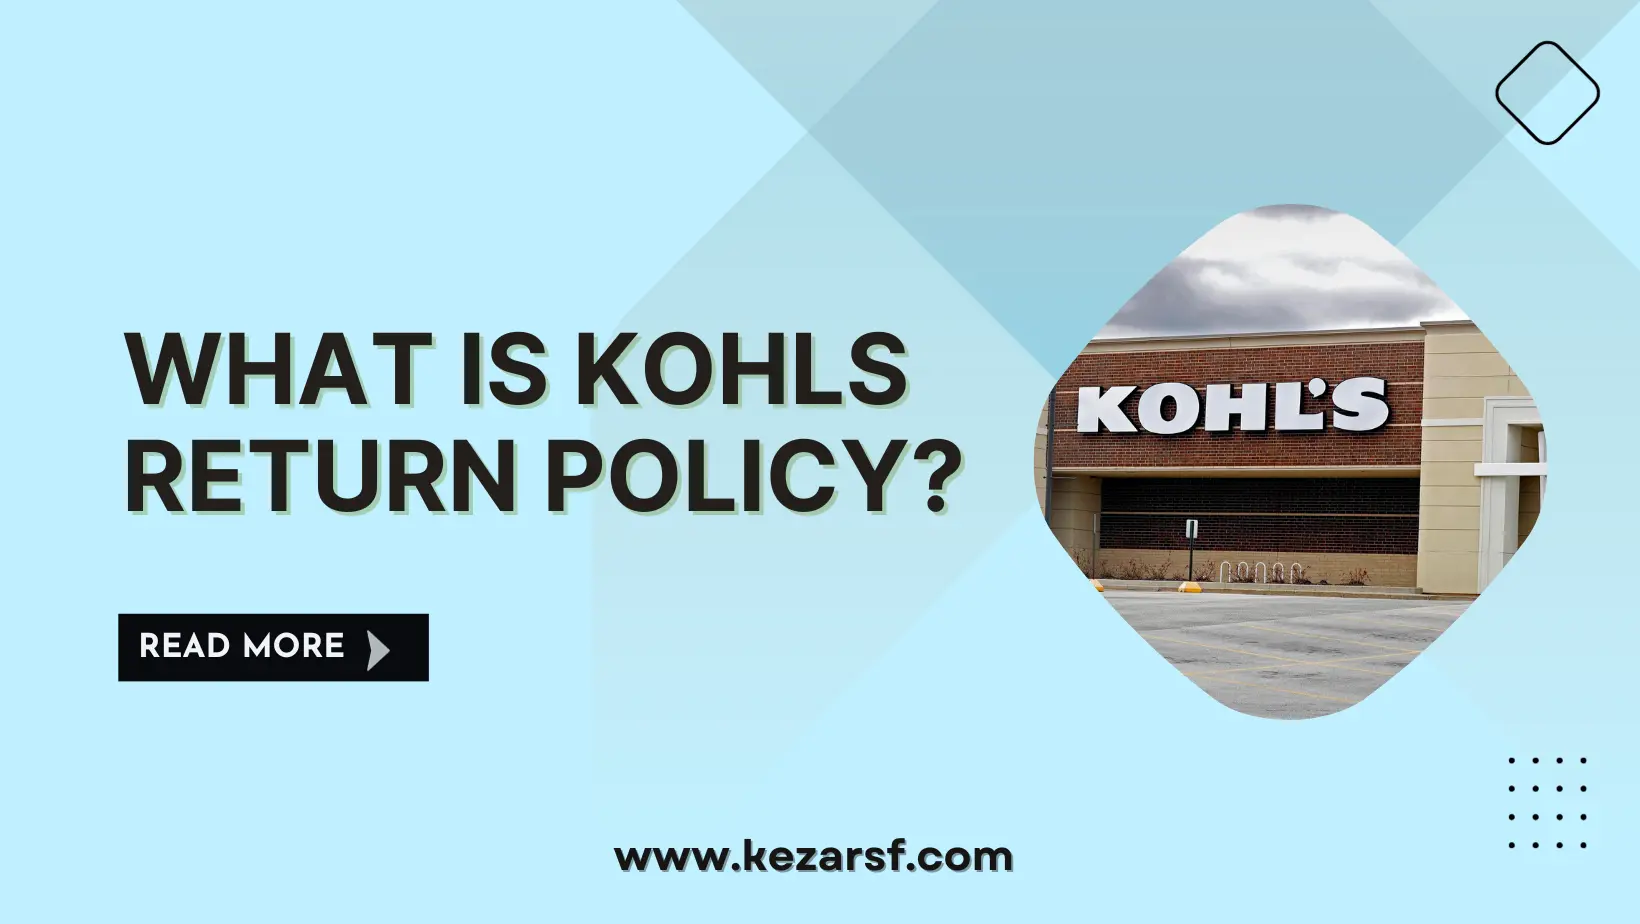 Kohl's Return Policy: Rules, Time Frame, Items and Exceptions